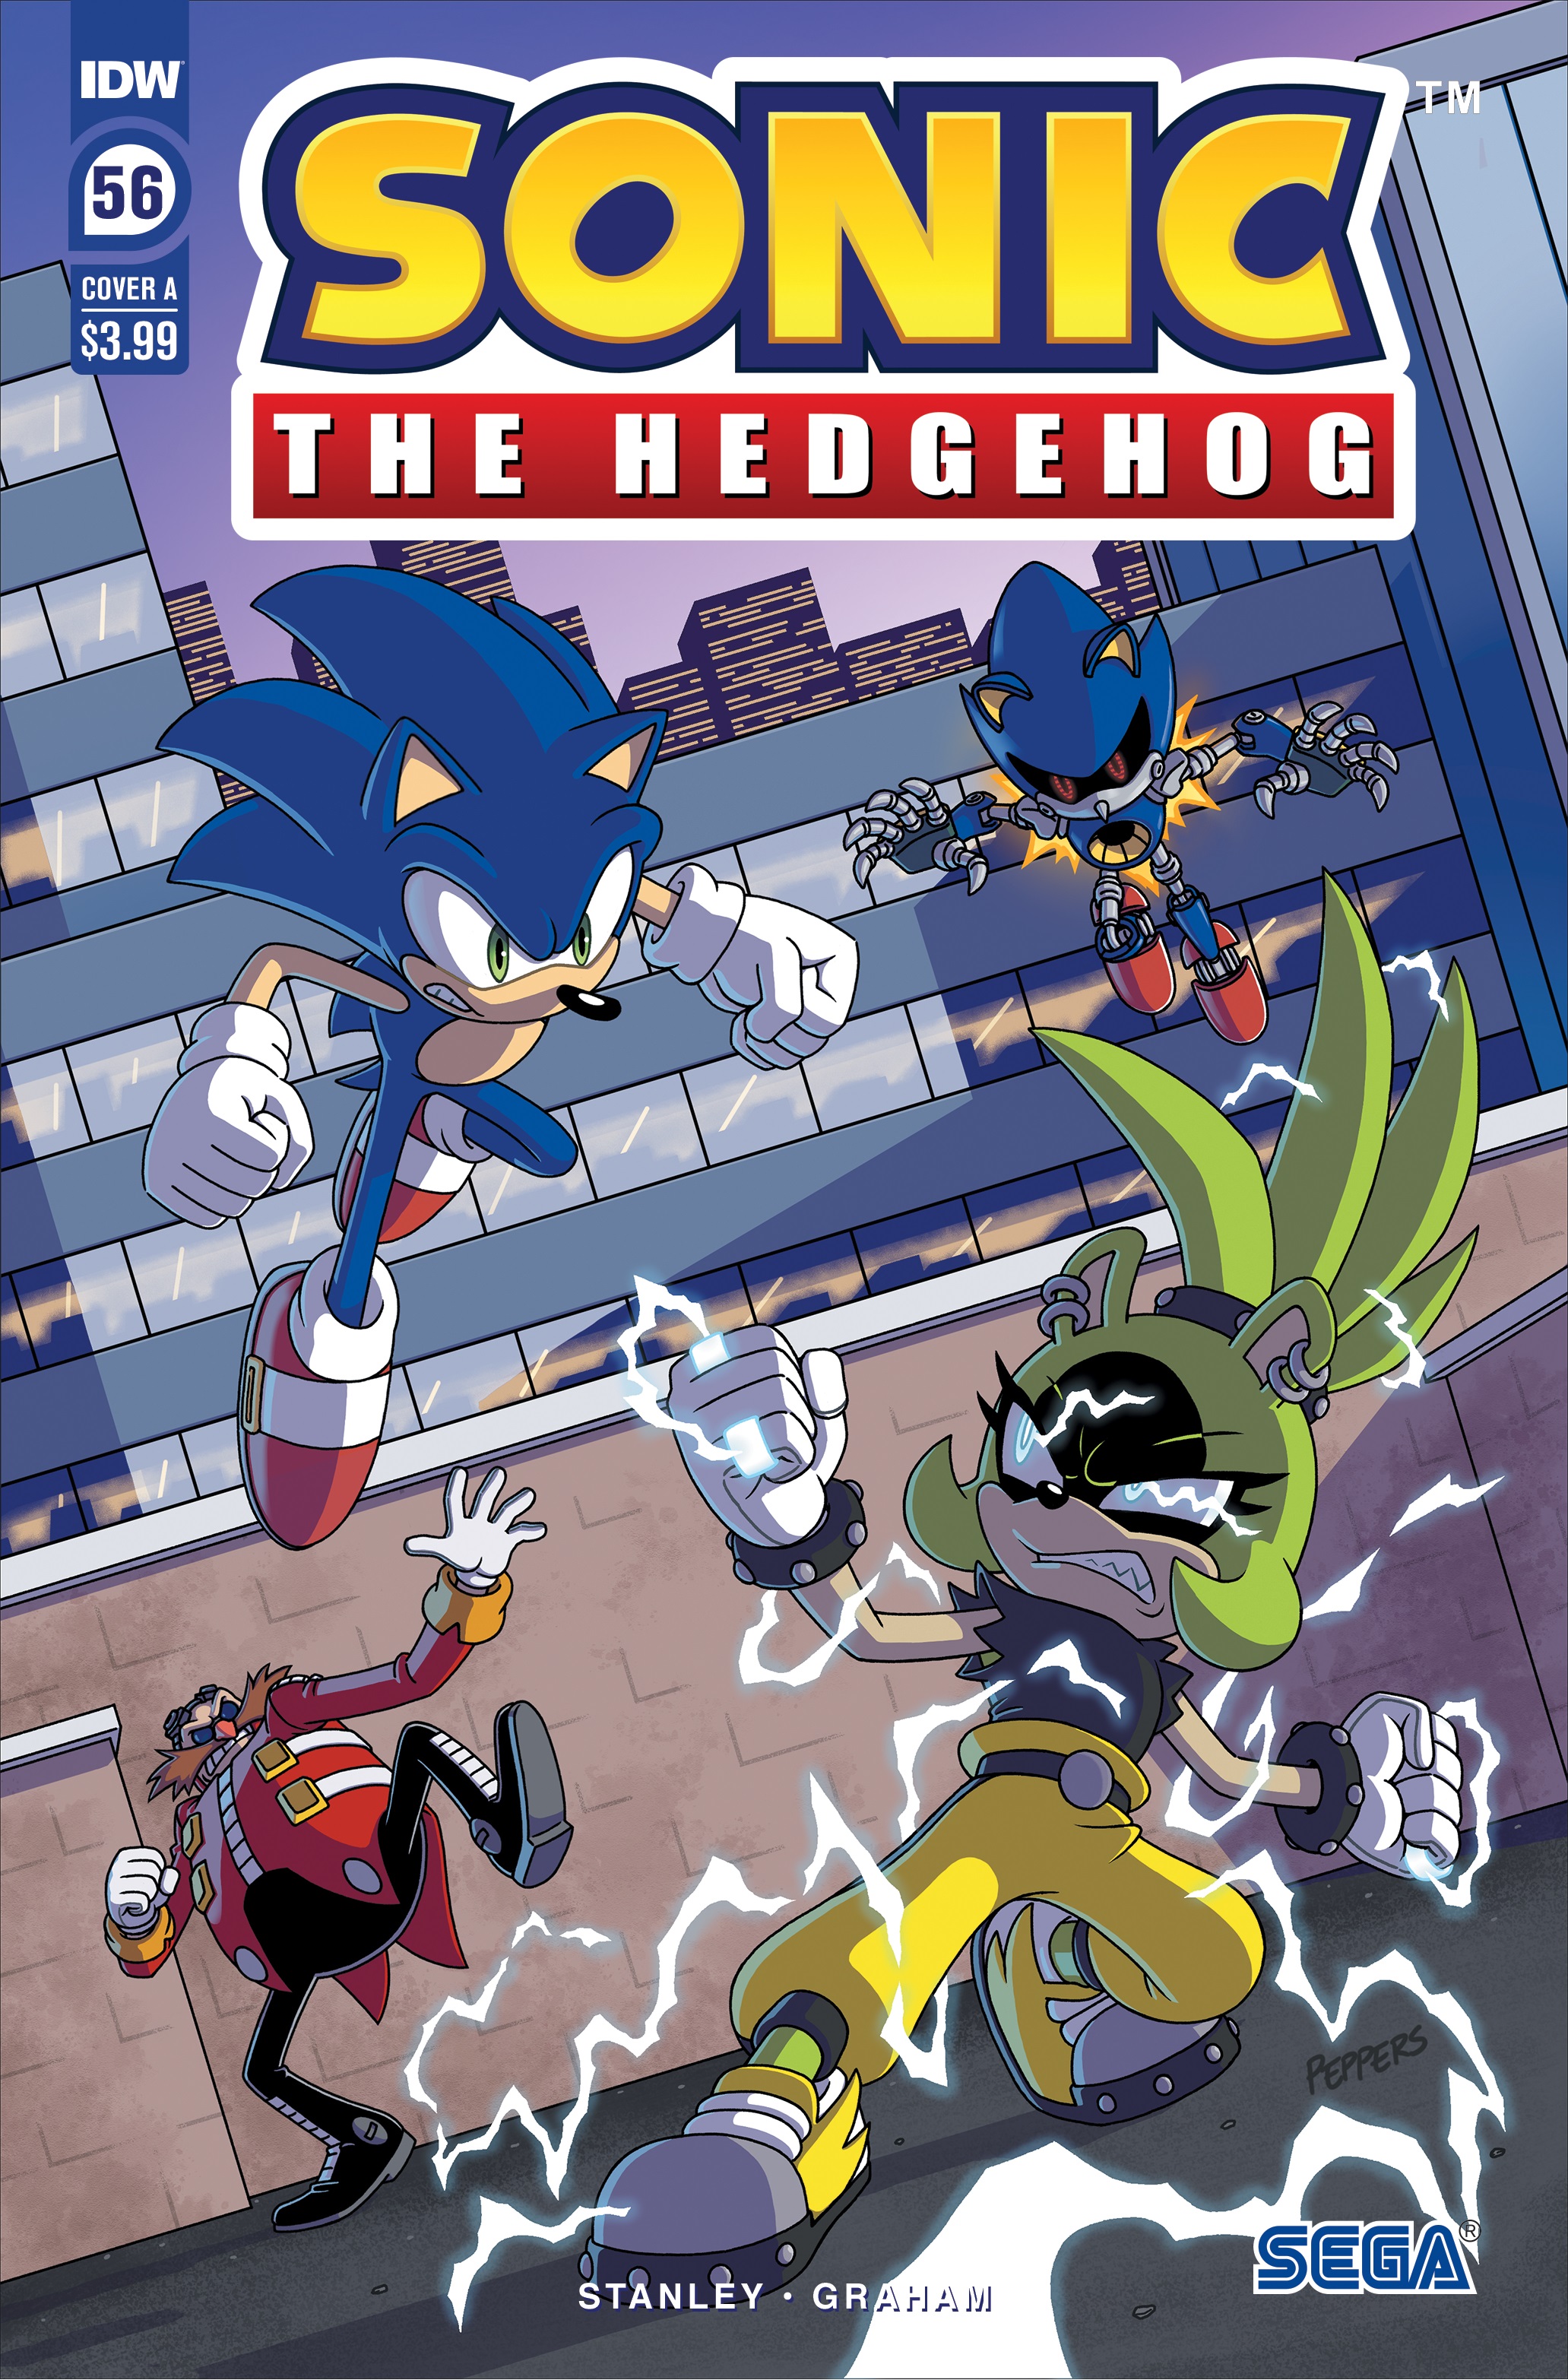 Sonic the Hedgehog 2: The Official Movie Pre-Quill, Wiki Sonic IDW News